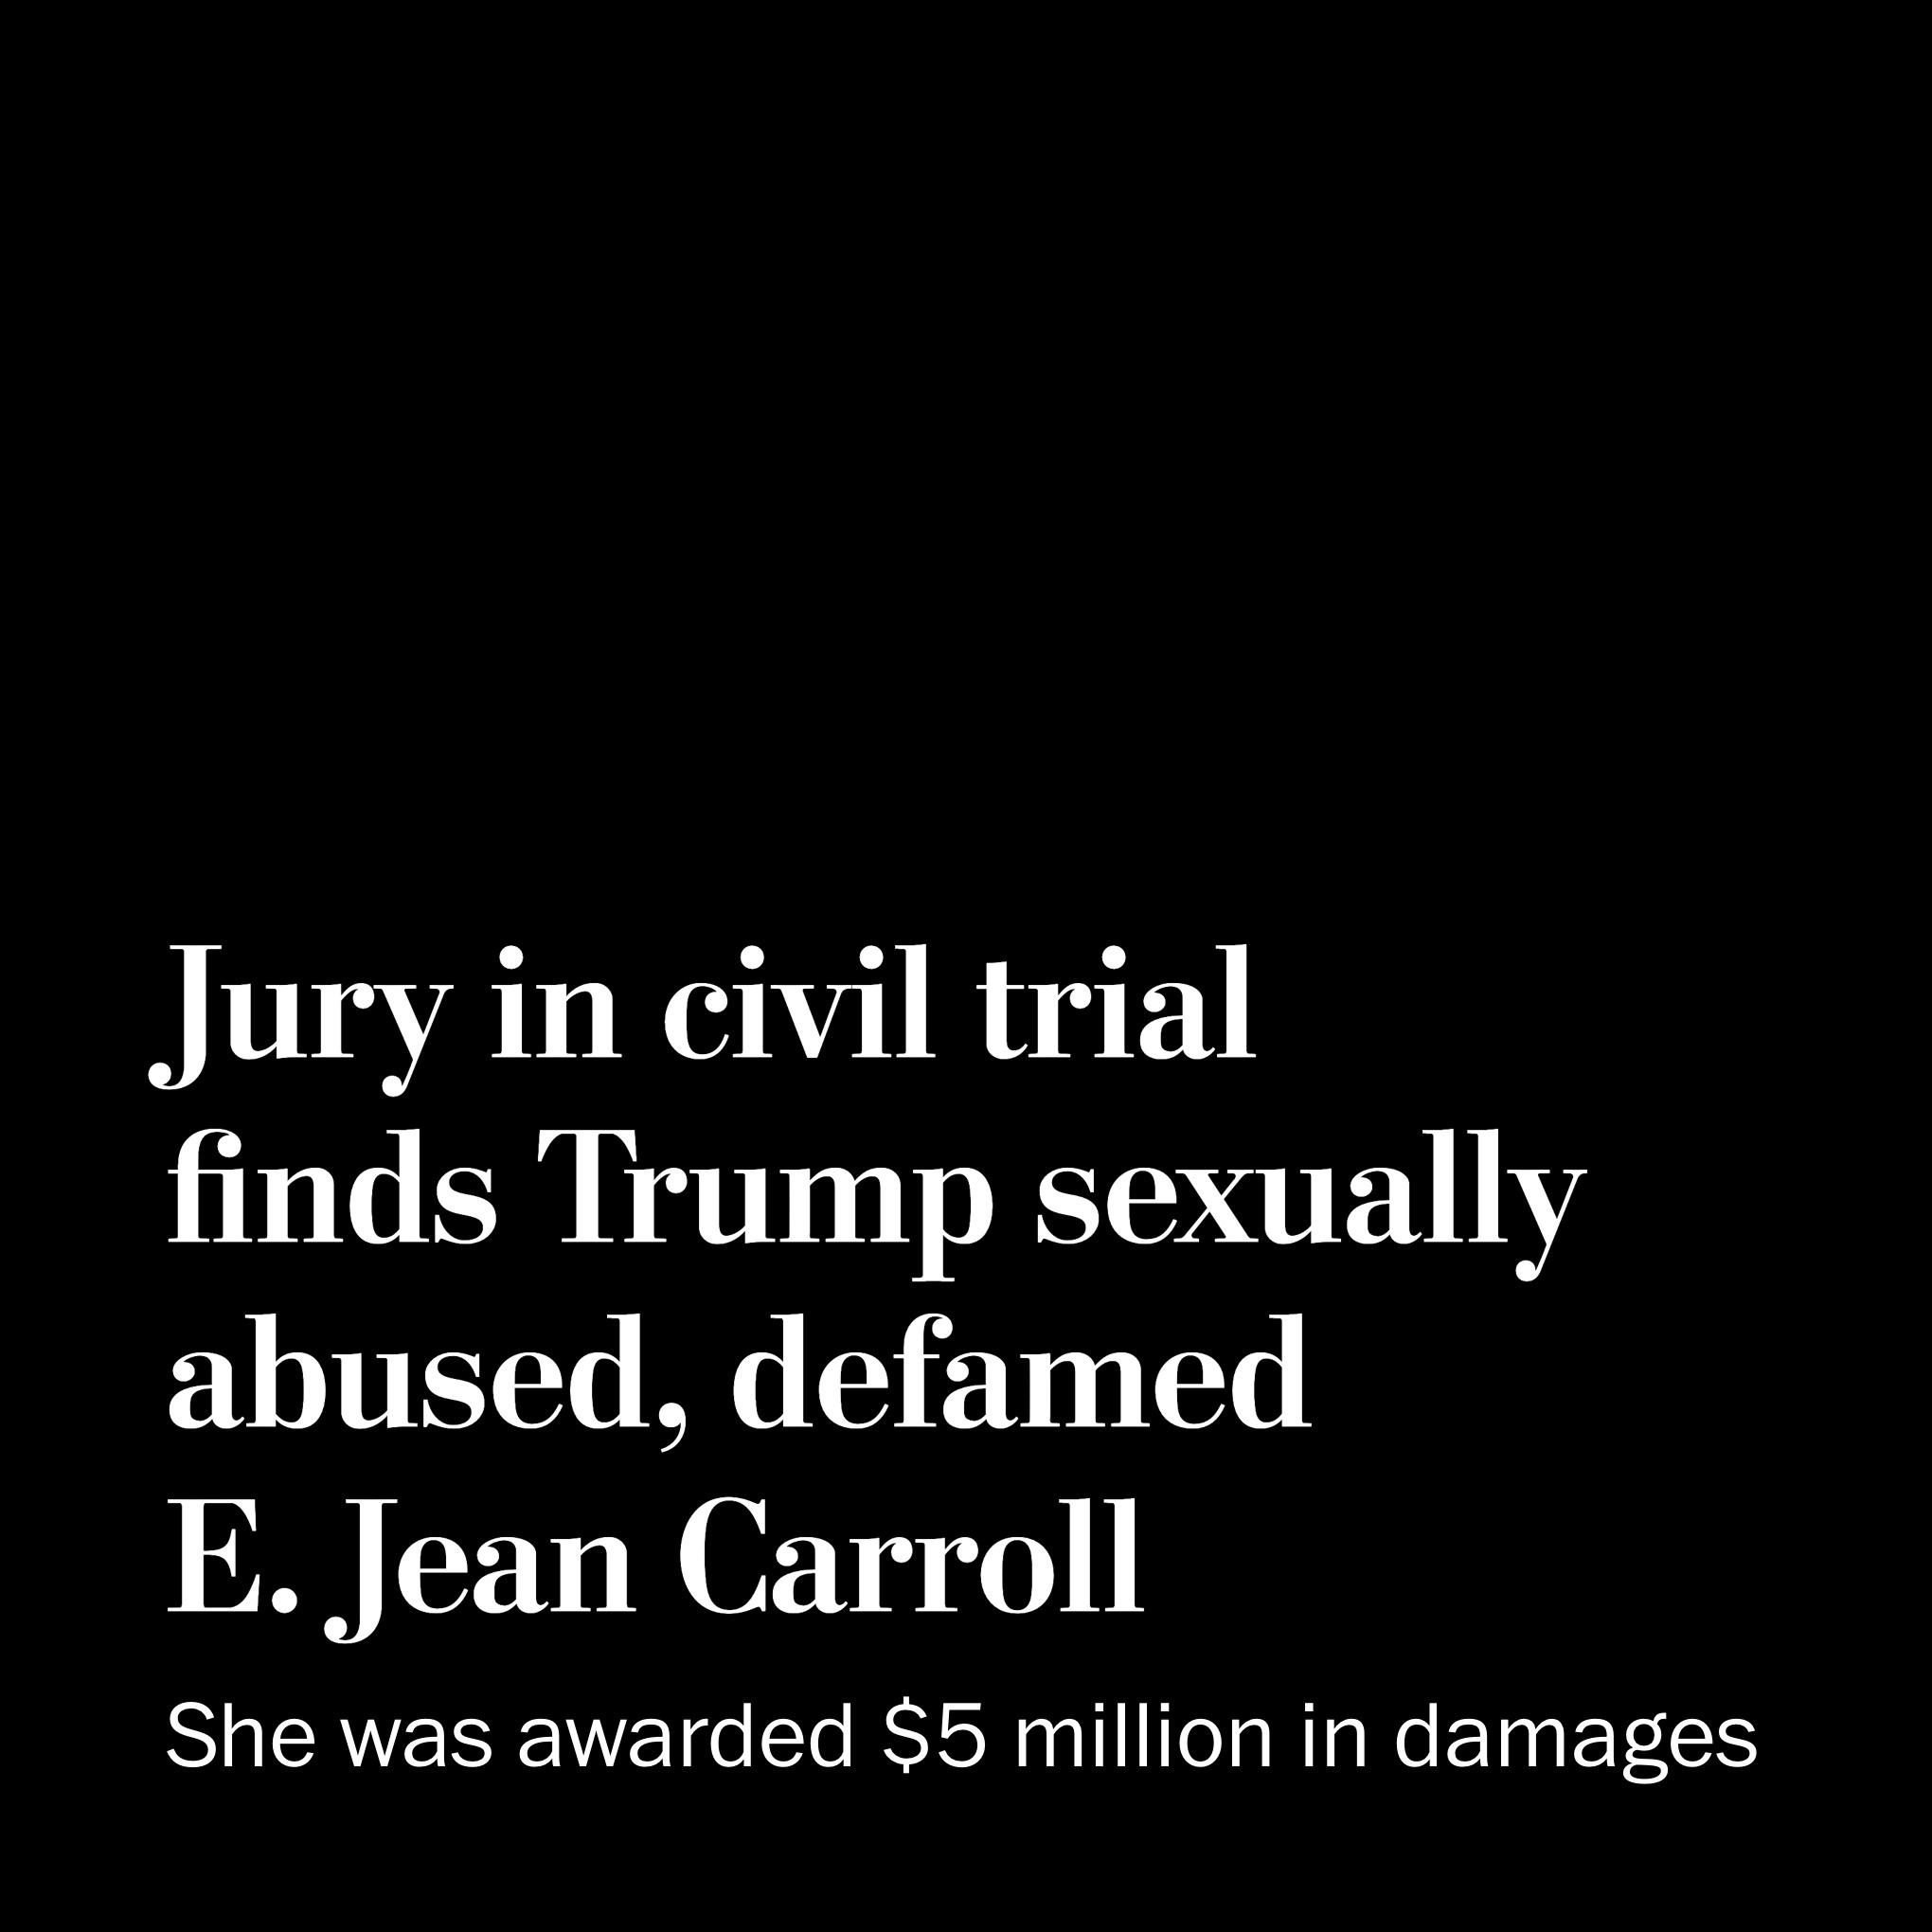 Graphic reads: Jury in civil trial finds Trump sexually abused, defamed E Jean Carroll. She was awarded $5 million in damages.